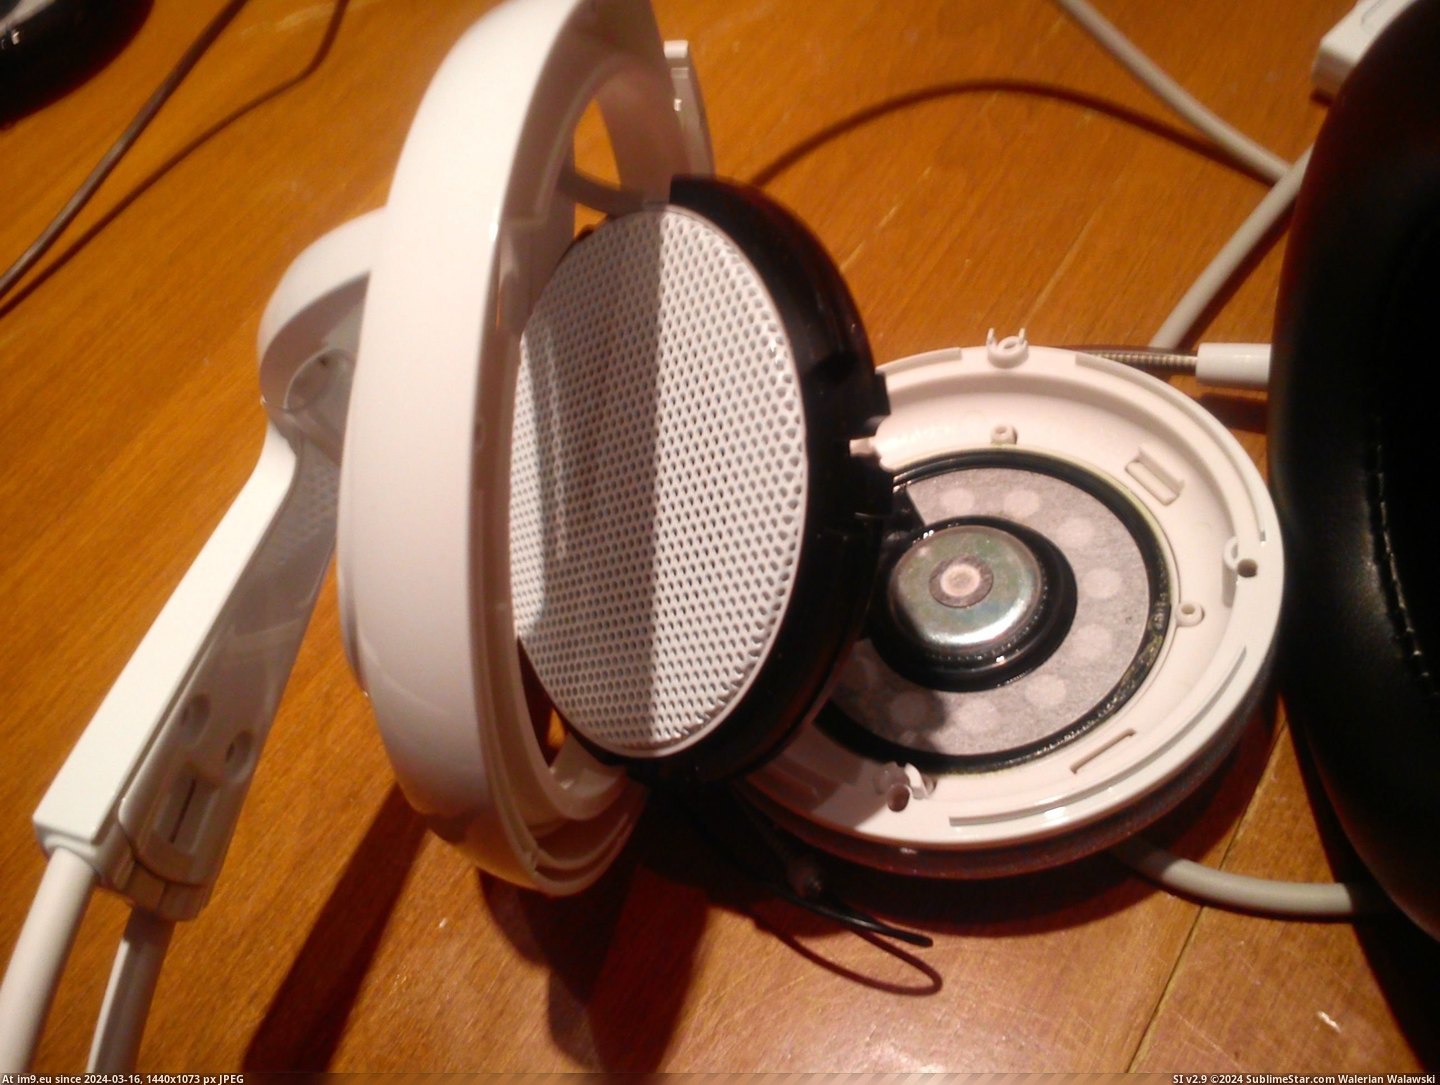 #Gaming #Headset #Modified [Gaming] I modified my headset. 3 Pic. (Bild von album My r/GAMING favs))